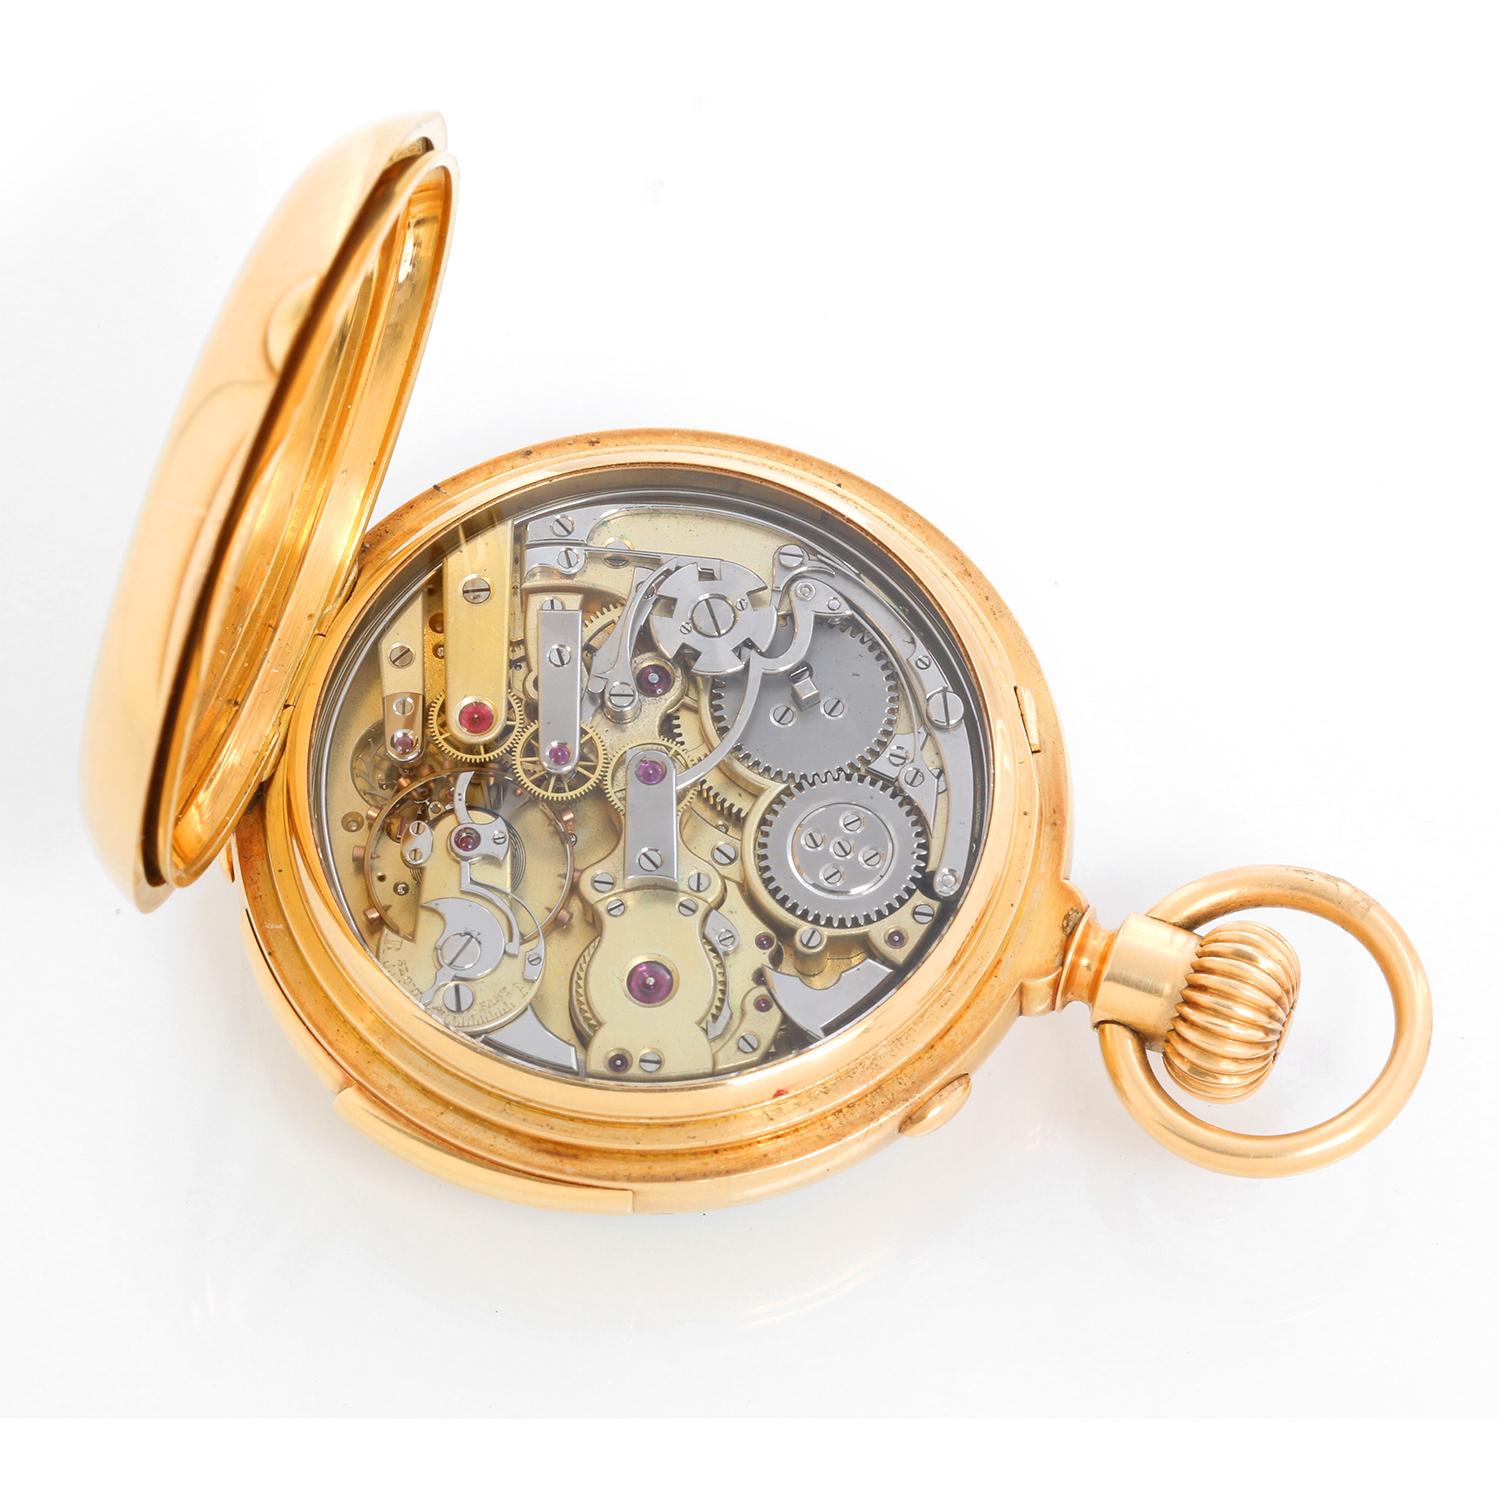 Marius Lecoultre Very Fine Gold Minute Repeater with Split Second Chronograph For Sale 1